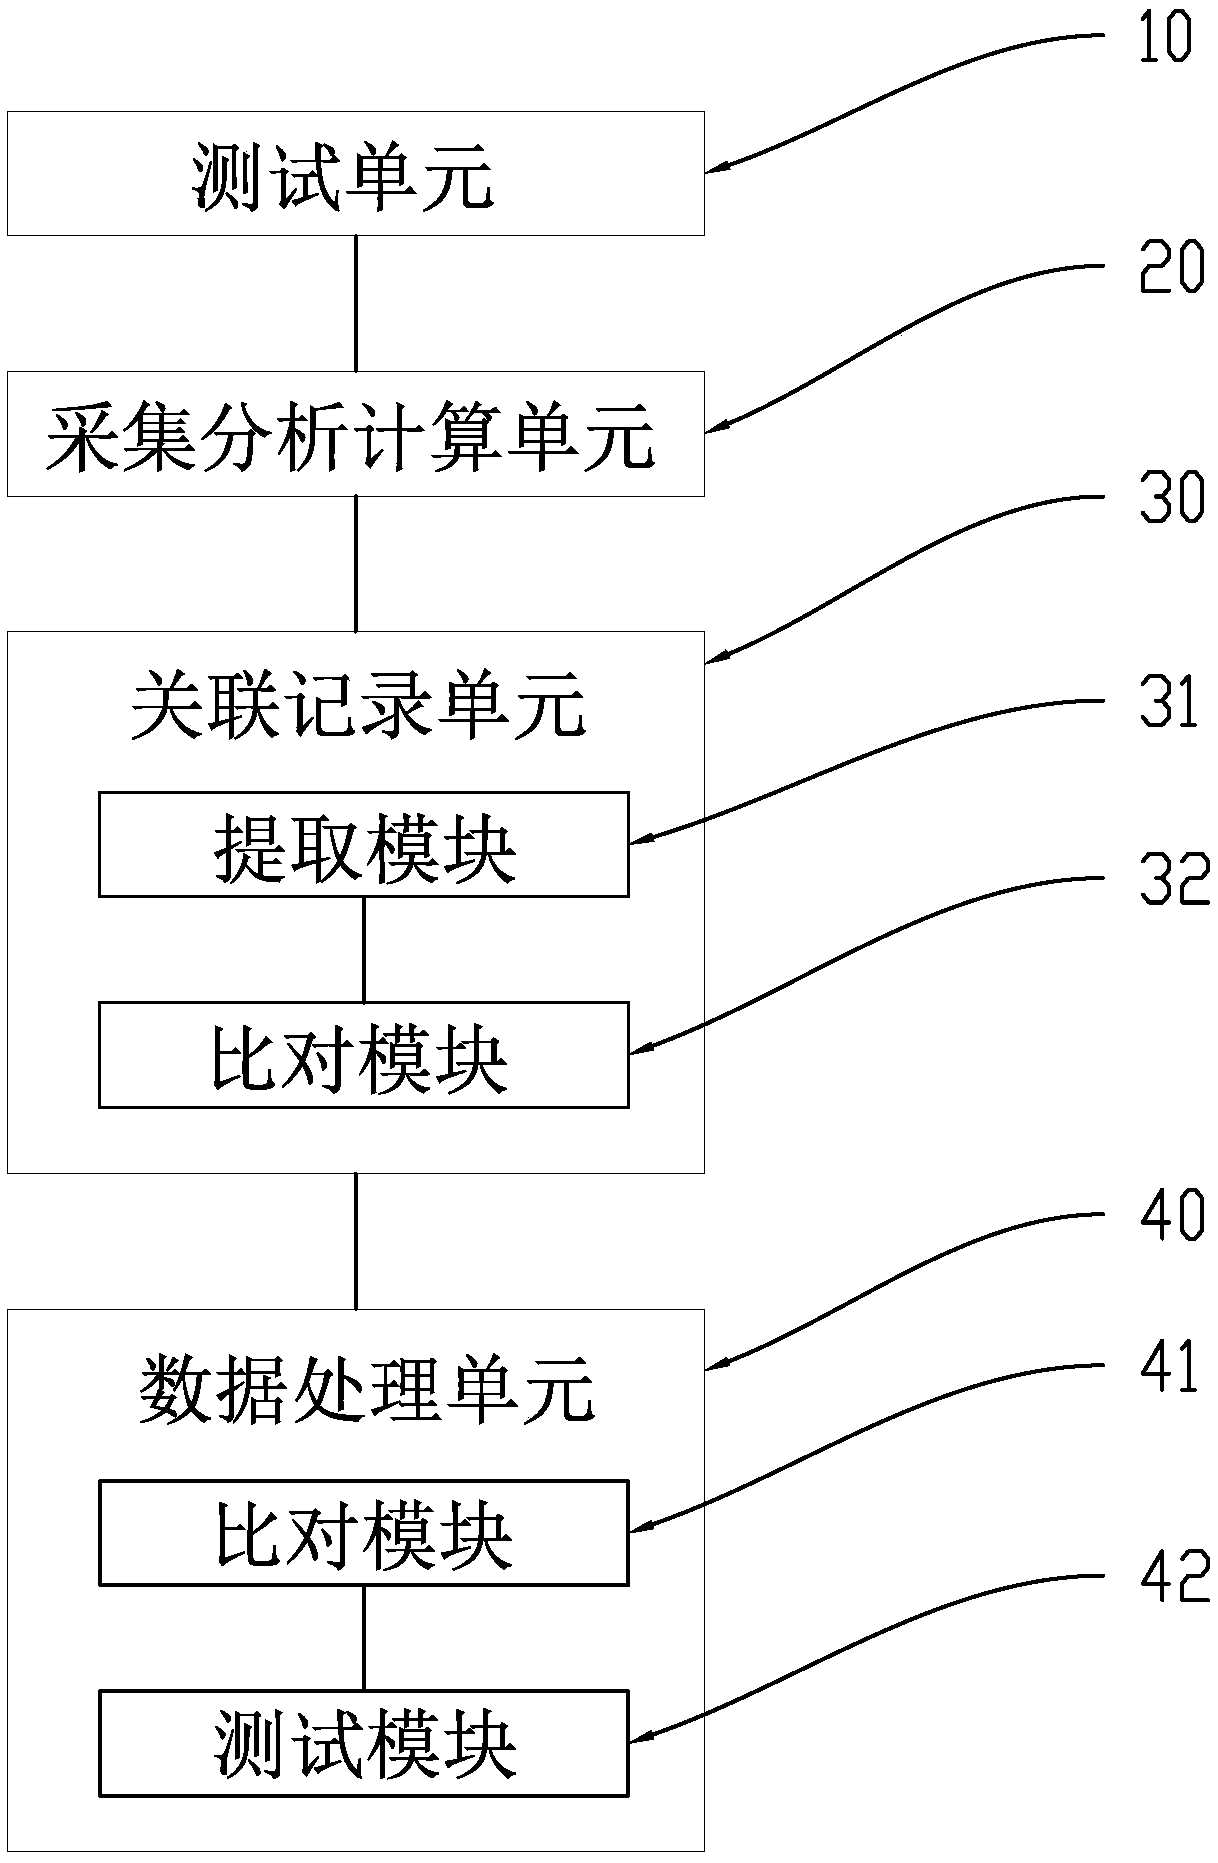 Method and system for creating electric power user electric appliance fingerprint database